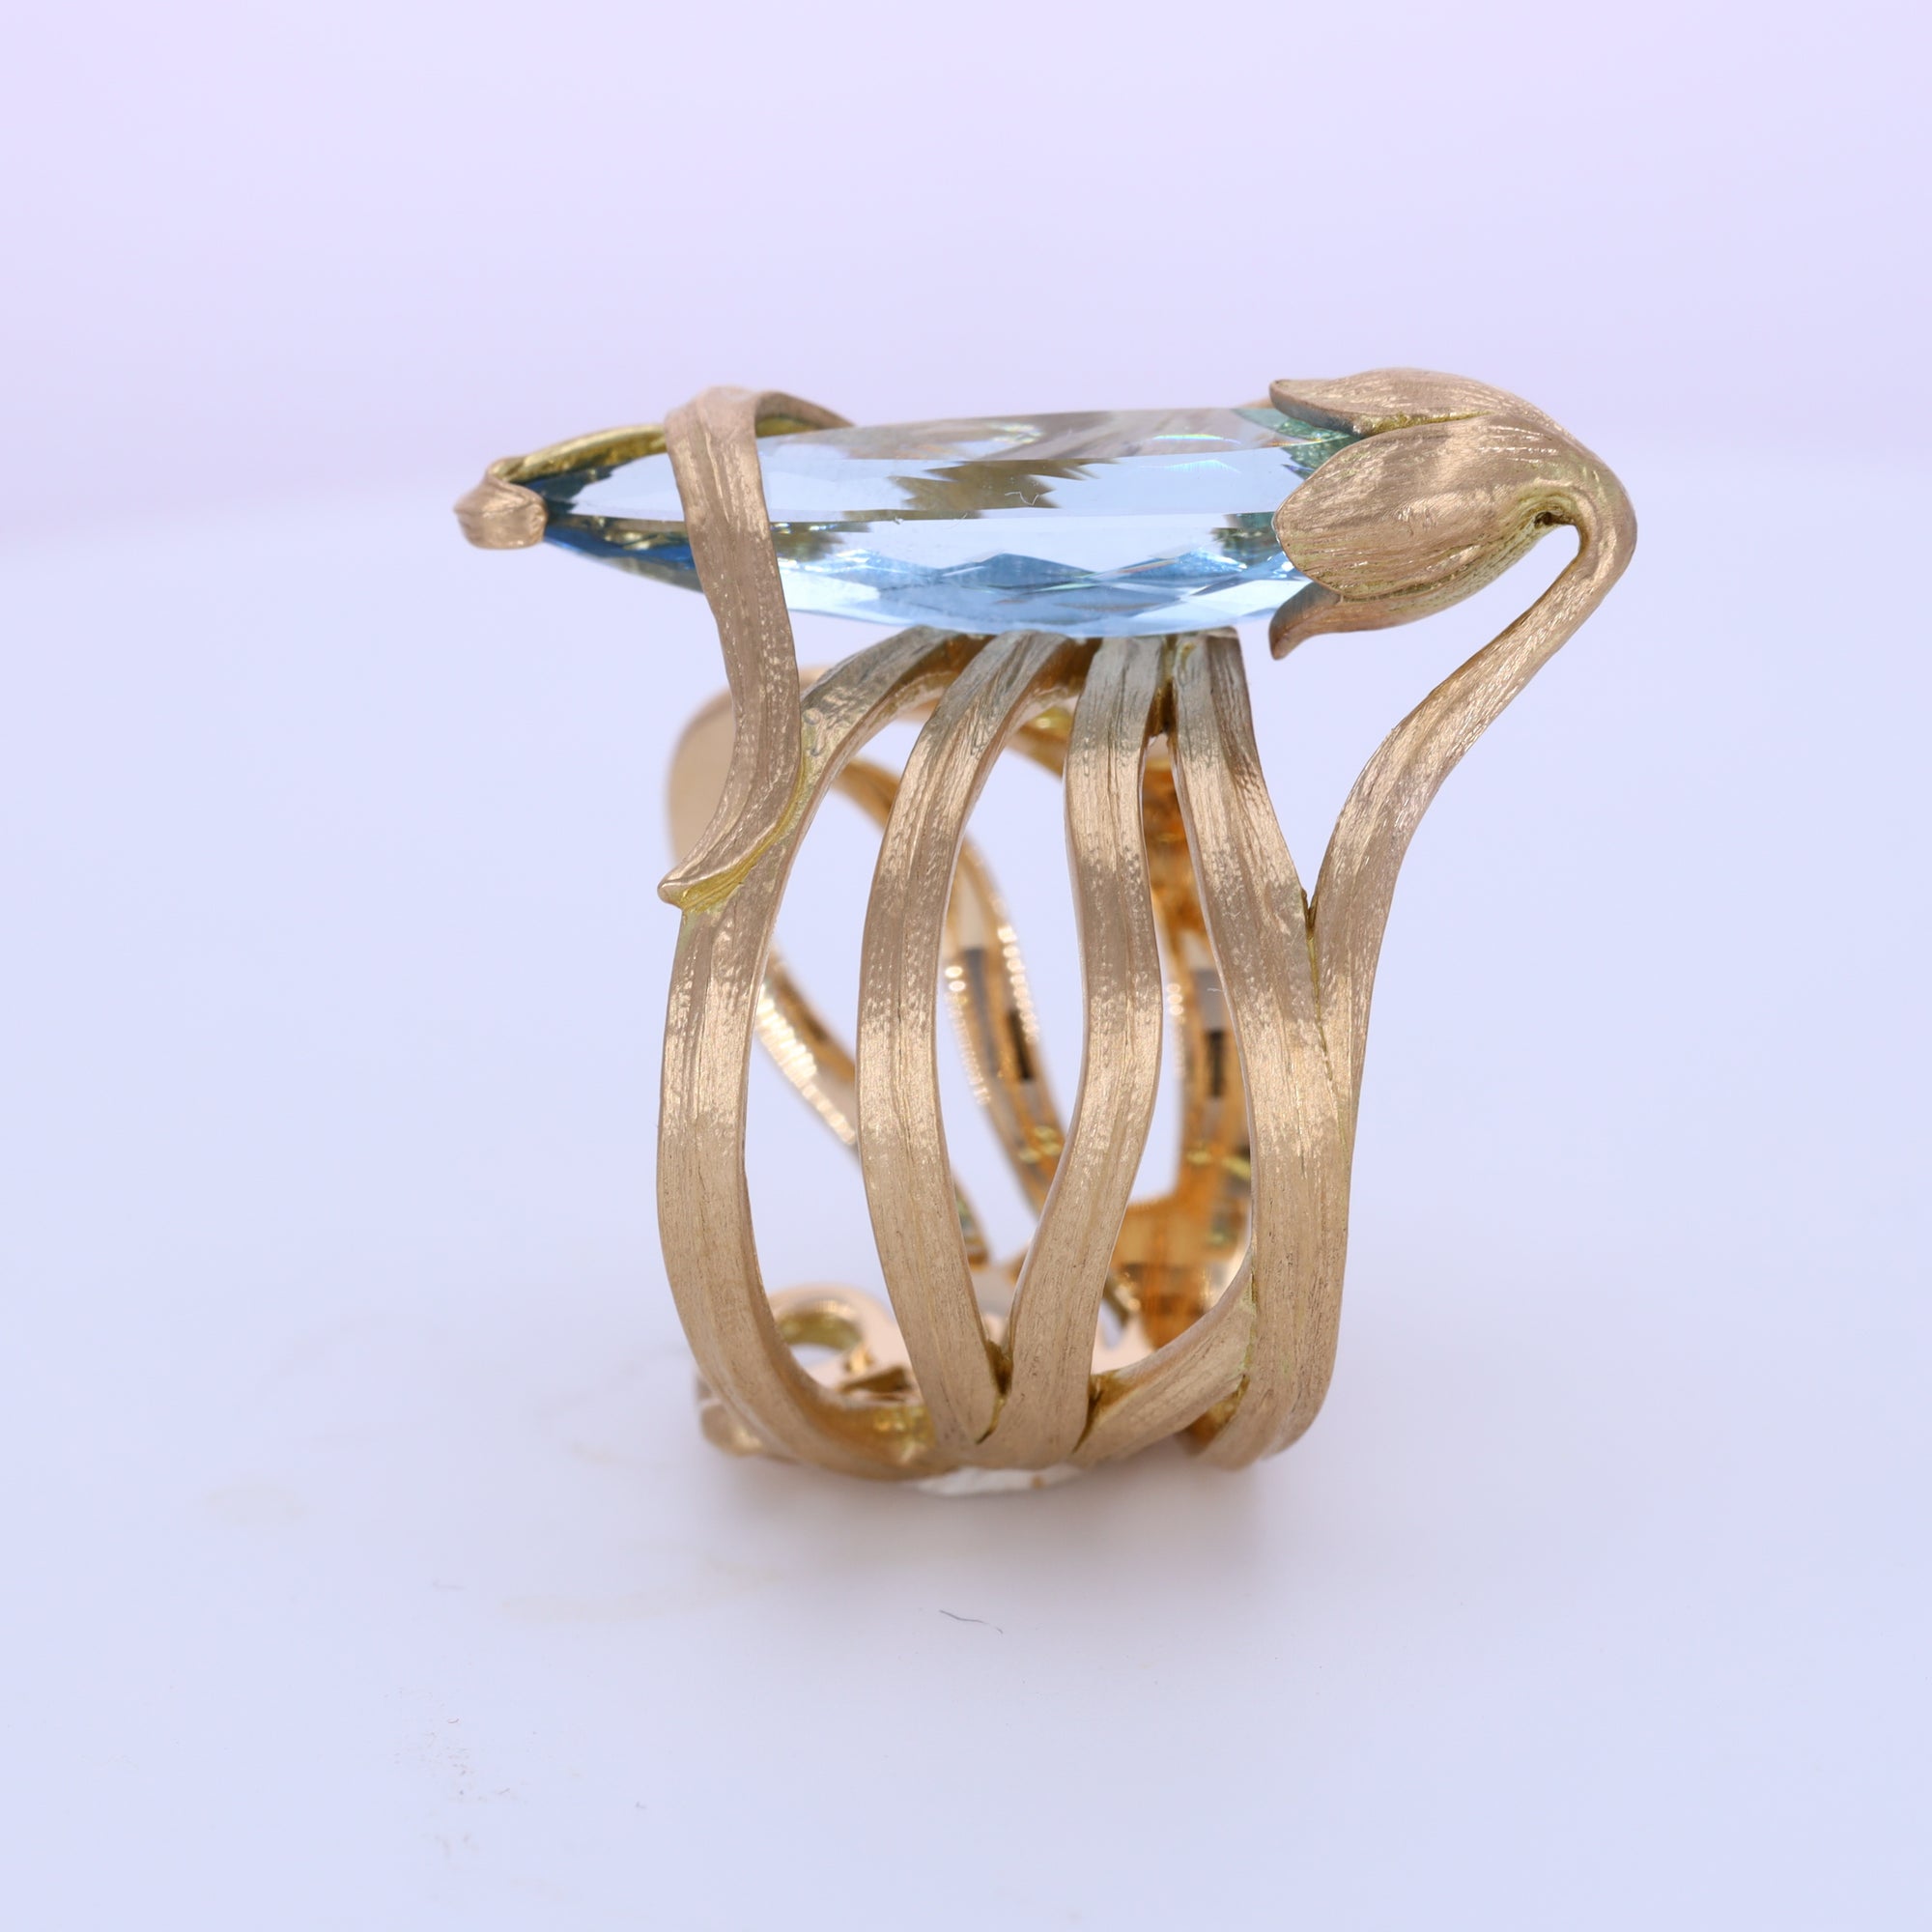 Art Nouveau aquamarine and 18K gold ring designed as scrolling leaves wrapped around the ring finger and gold sepals securing the aquamarine